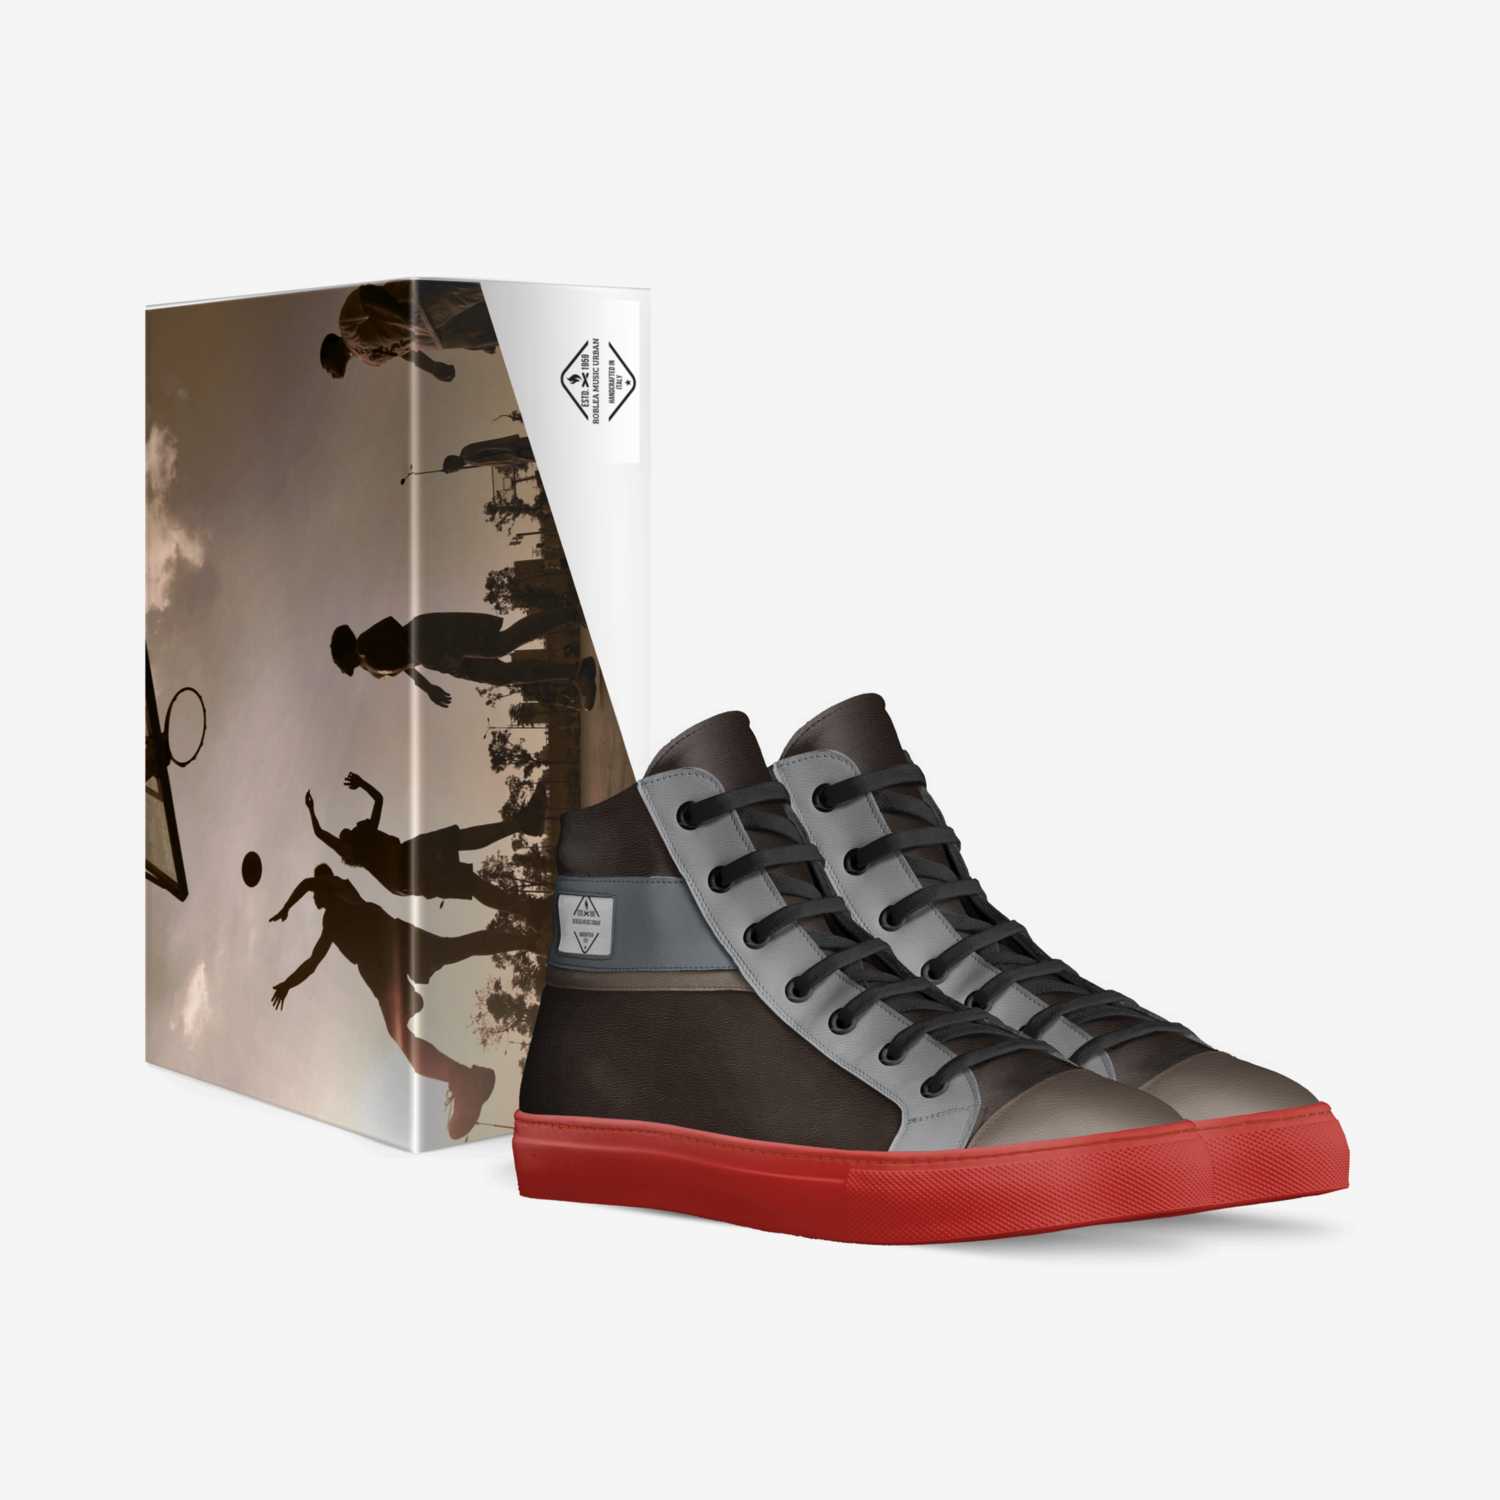 Roblea Music Urban custom made in Italy shoes by Robert Leach | Box view